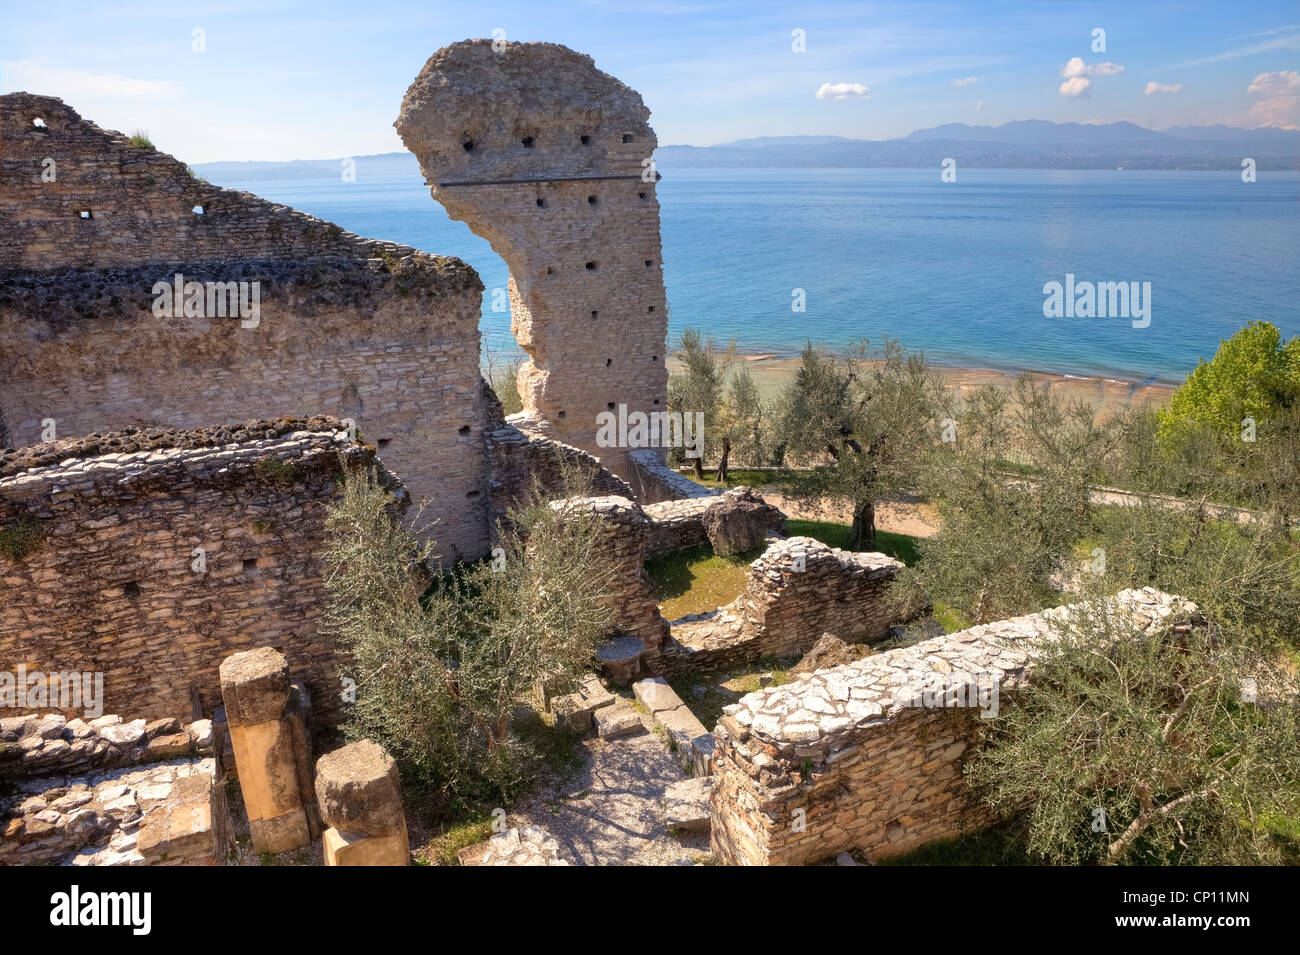 Grottoes of Catullus, Roman villa, Sirmione, Lombardy, Italy Stock Photo